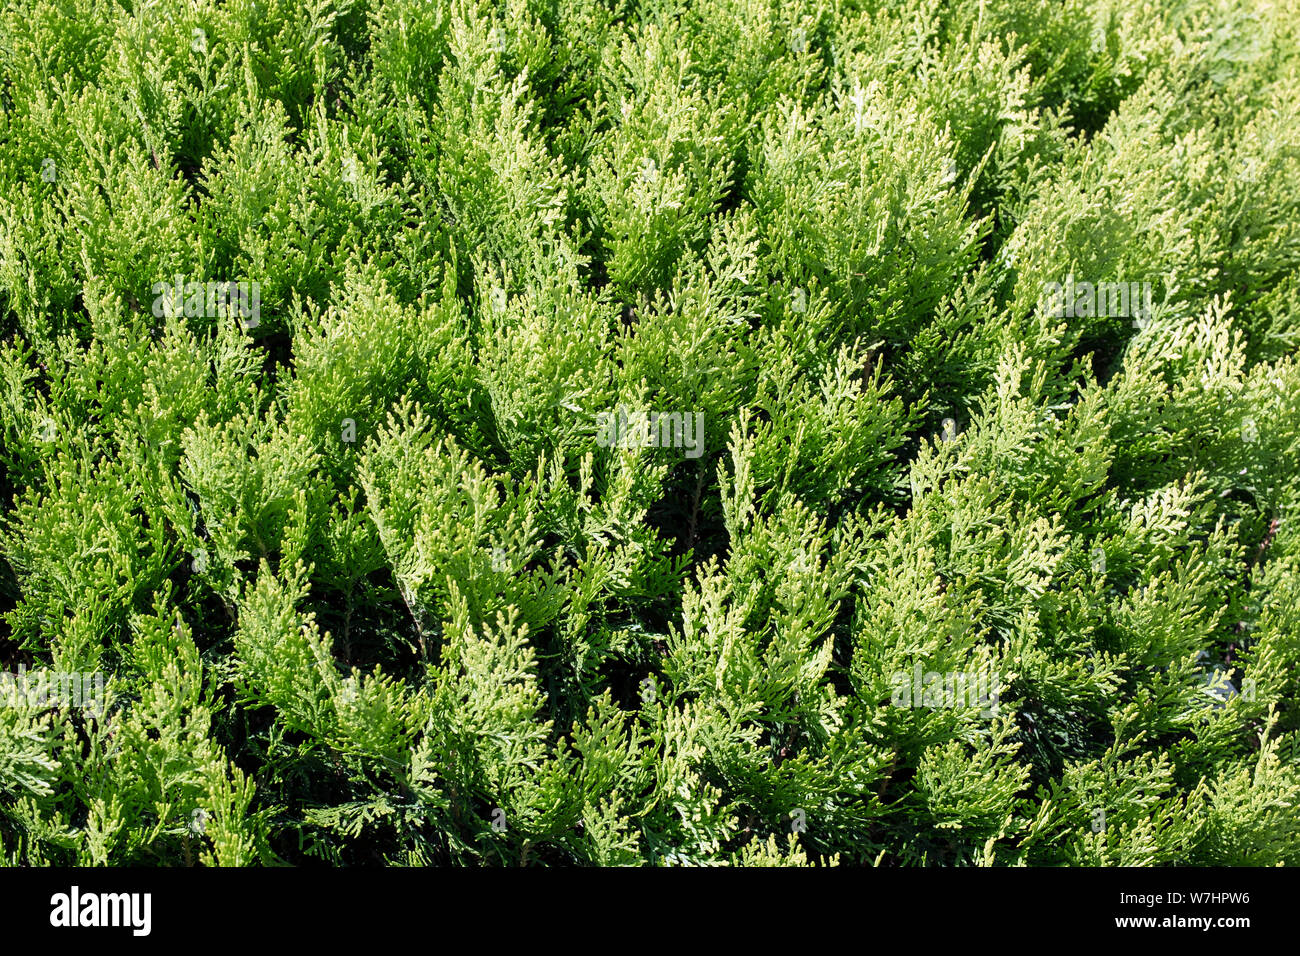 Thuja texture. Close-up of green thuja branches Stock Photo